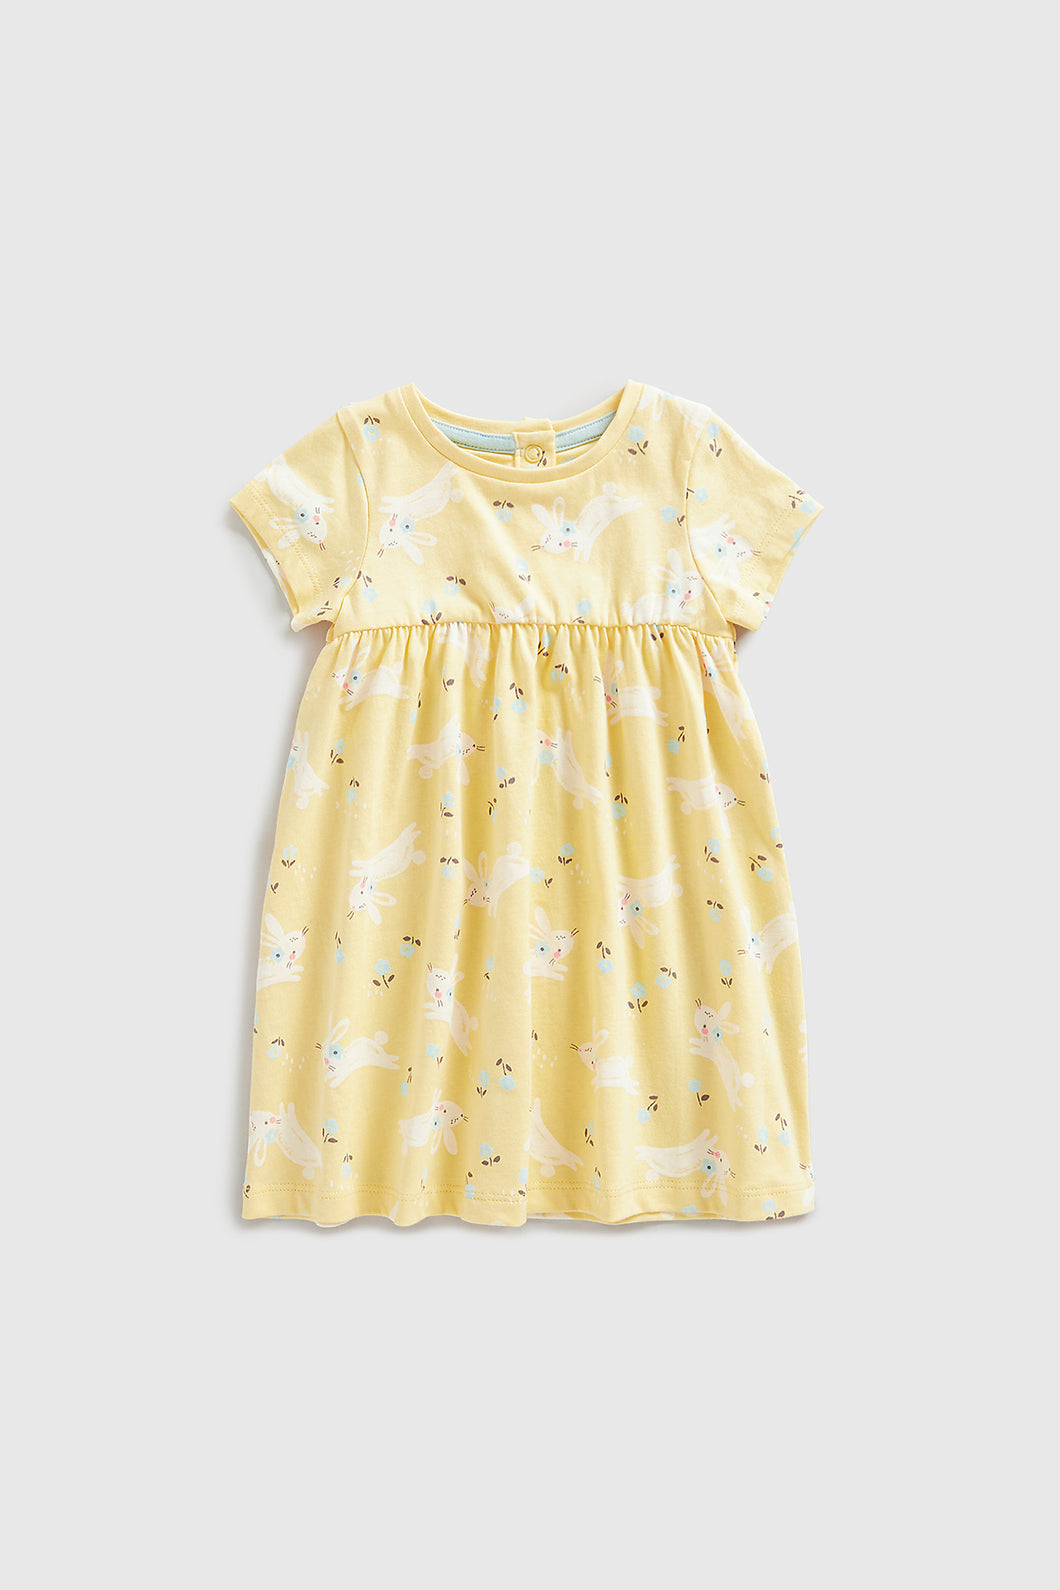 Mothercare Bunny Jersey Dress